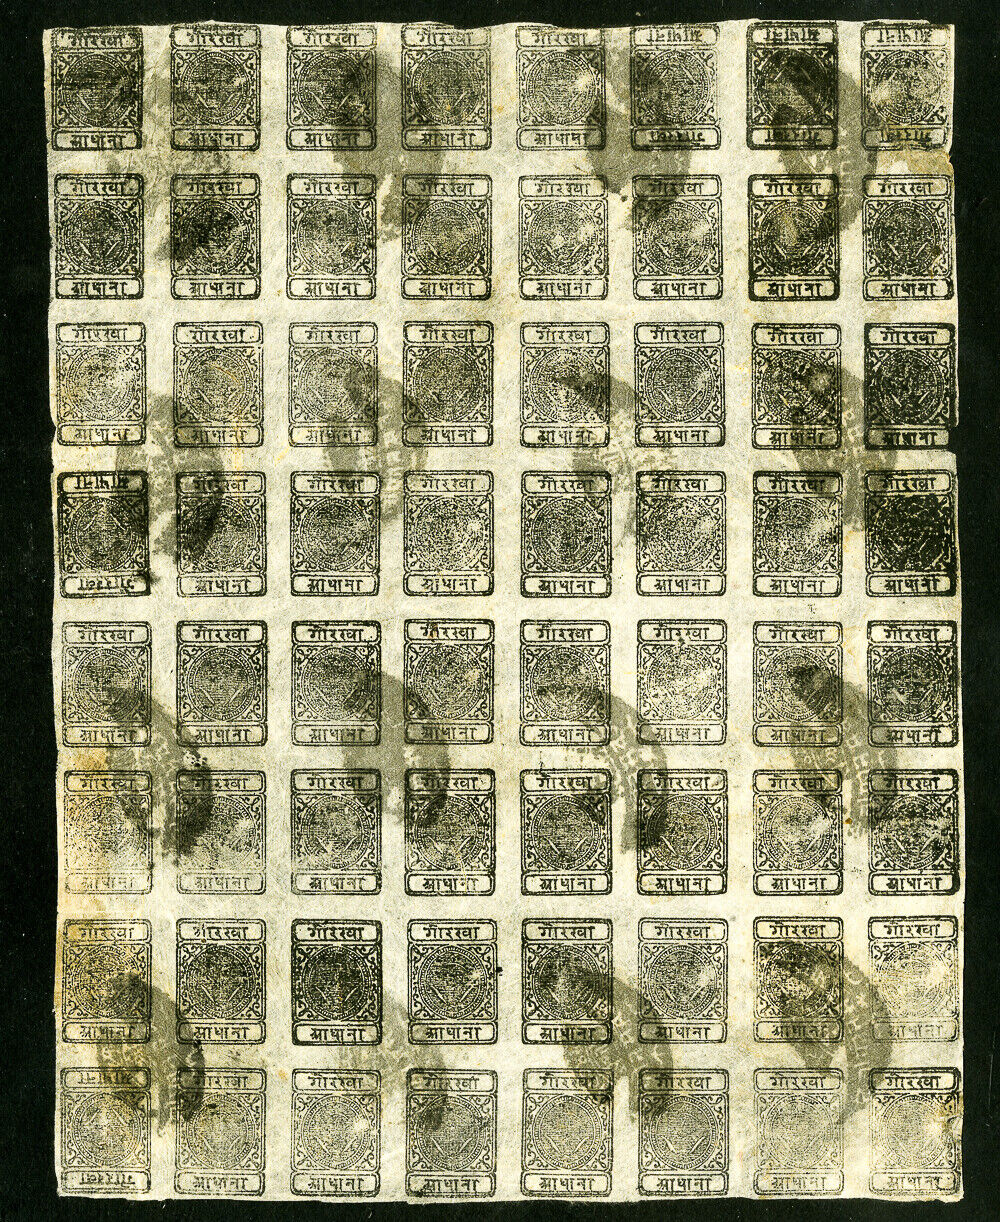 Nepal Stamps Rare Sheet of 64 Went Through the Mail